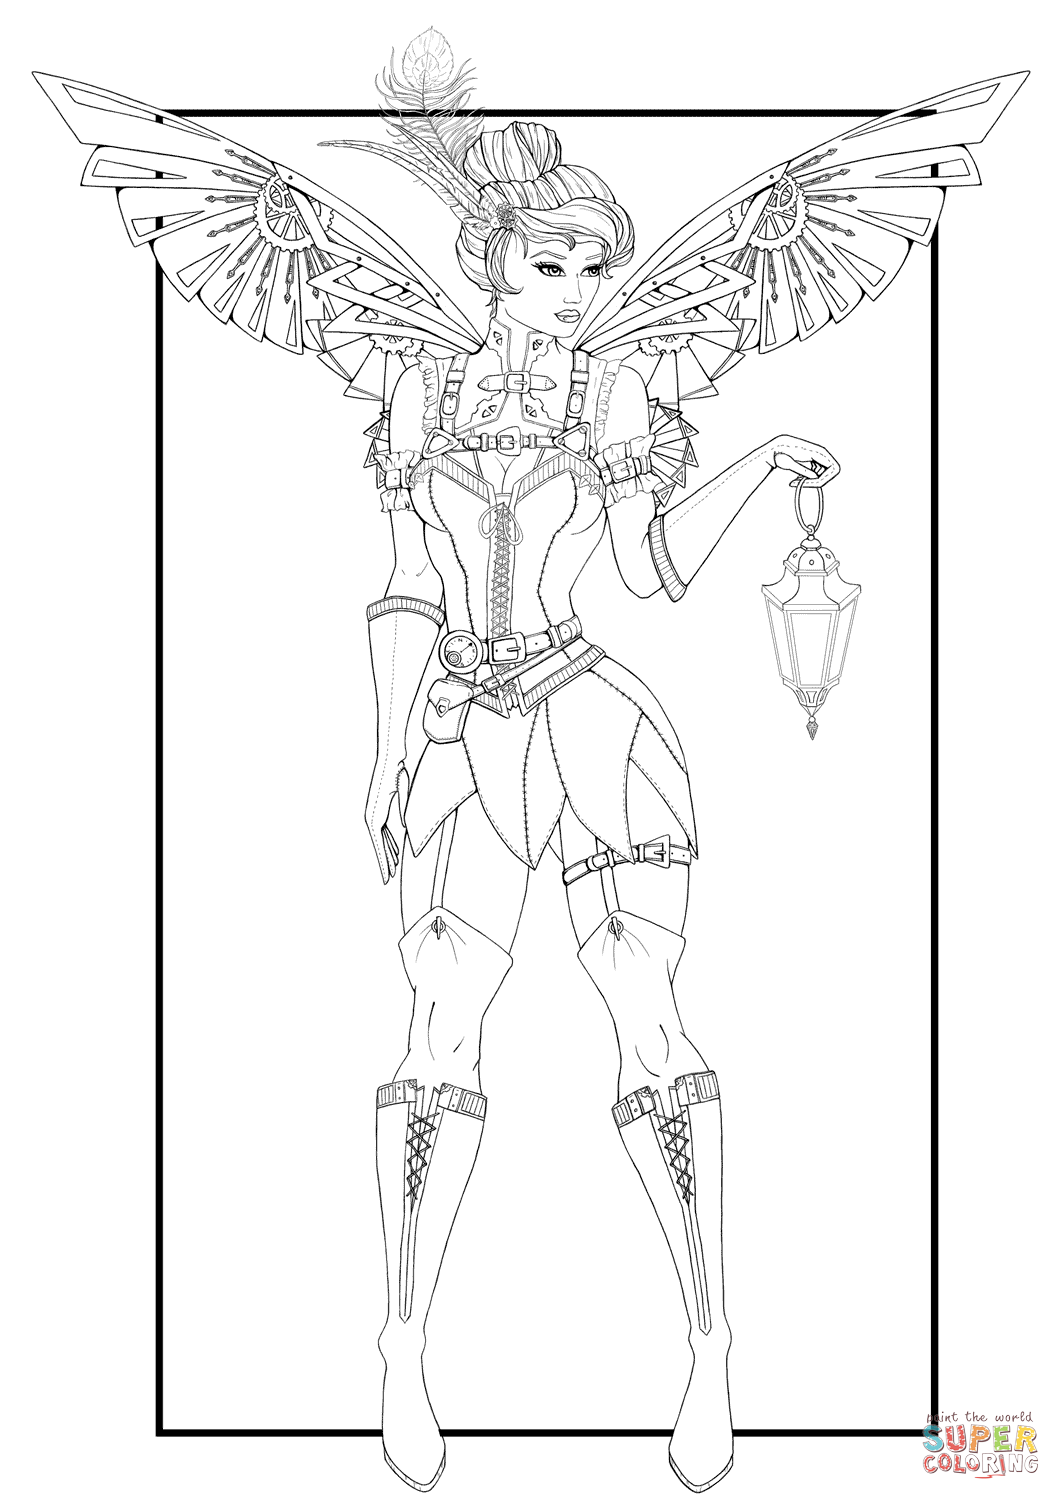 Steampunk tinkerbell coloring page free printable coloring pages